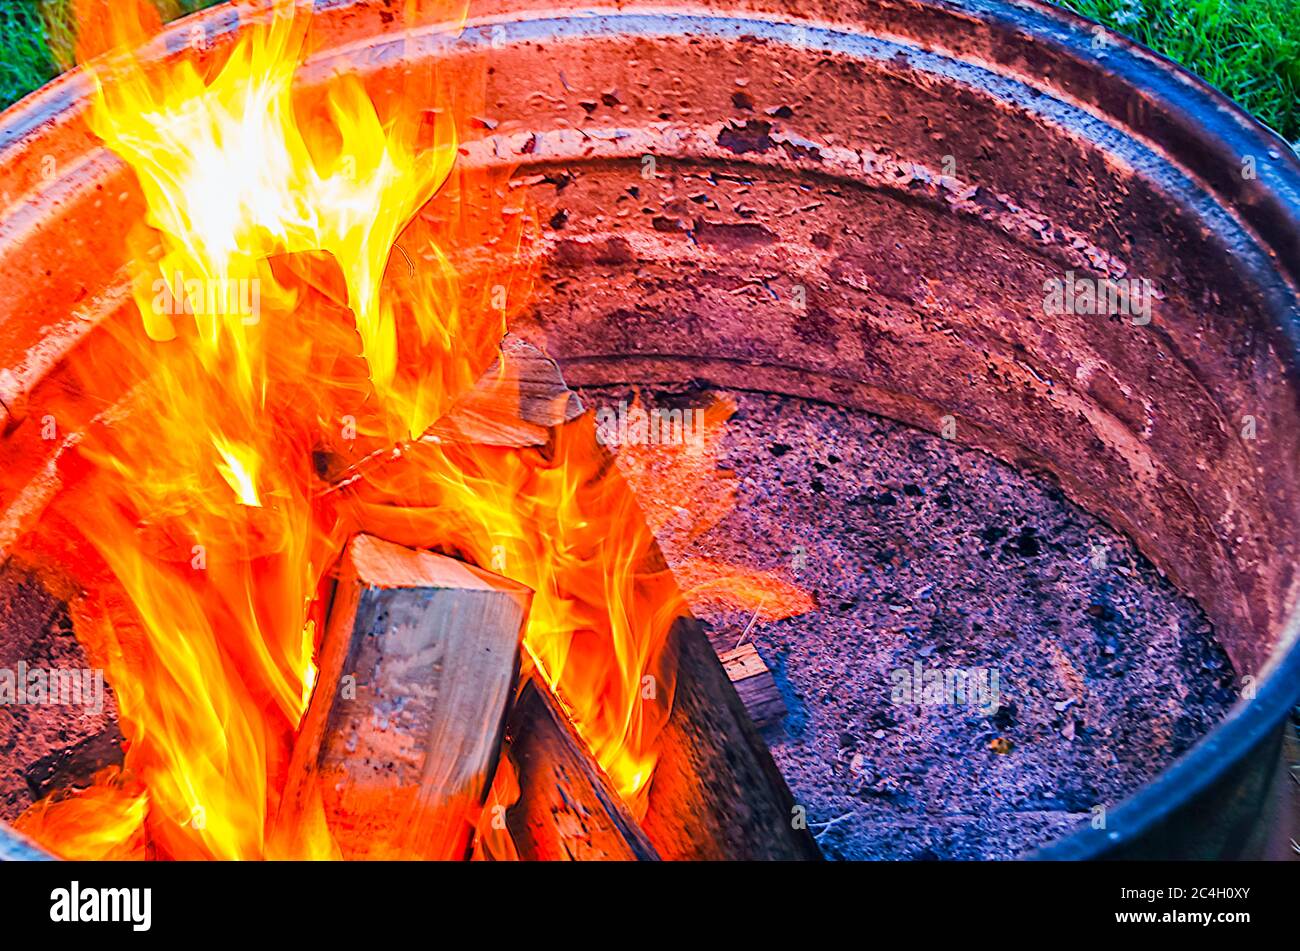 Flames rising from logs being burnt in a bonfire lit inside a metal drum. Stock Photo